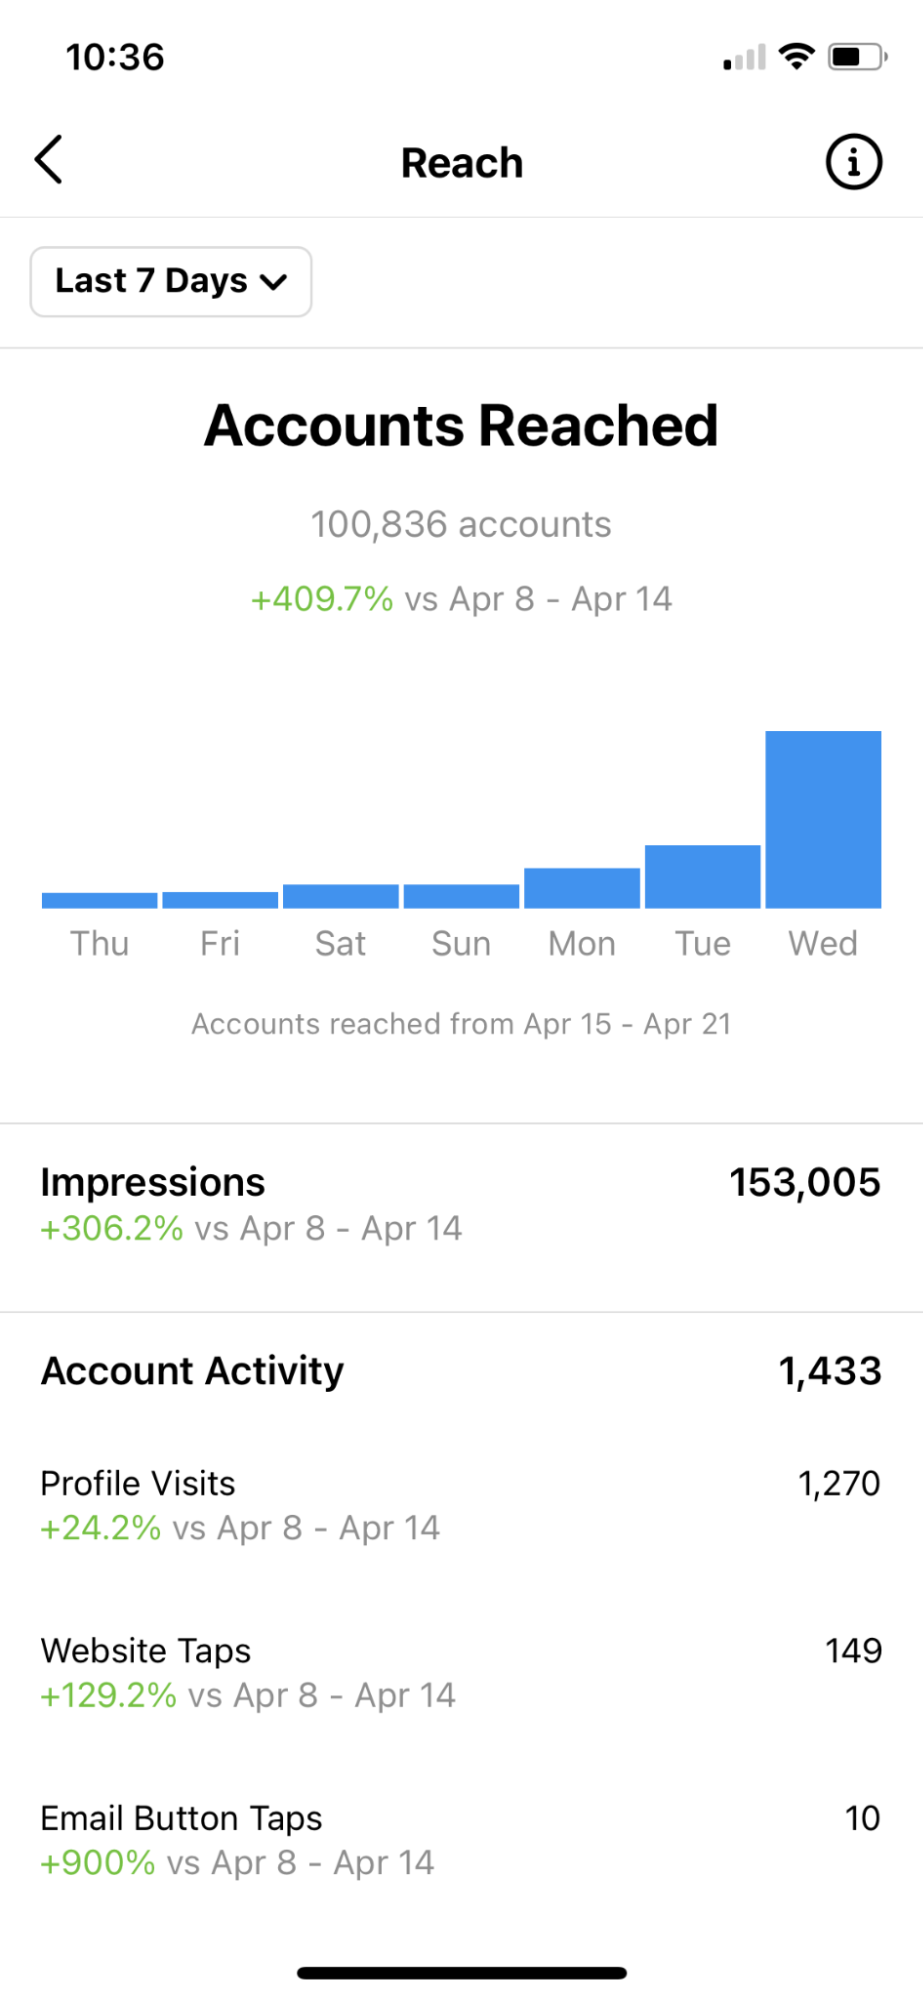 Instagram's reach statistics page for a seven-day period.